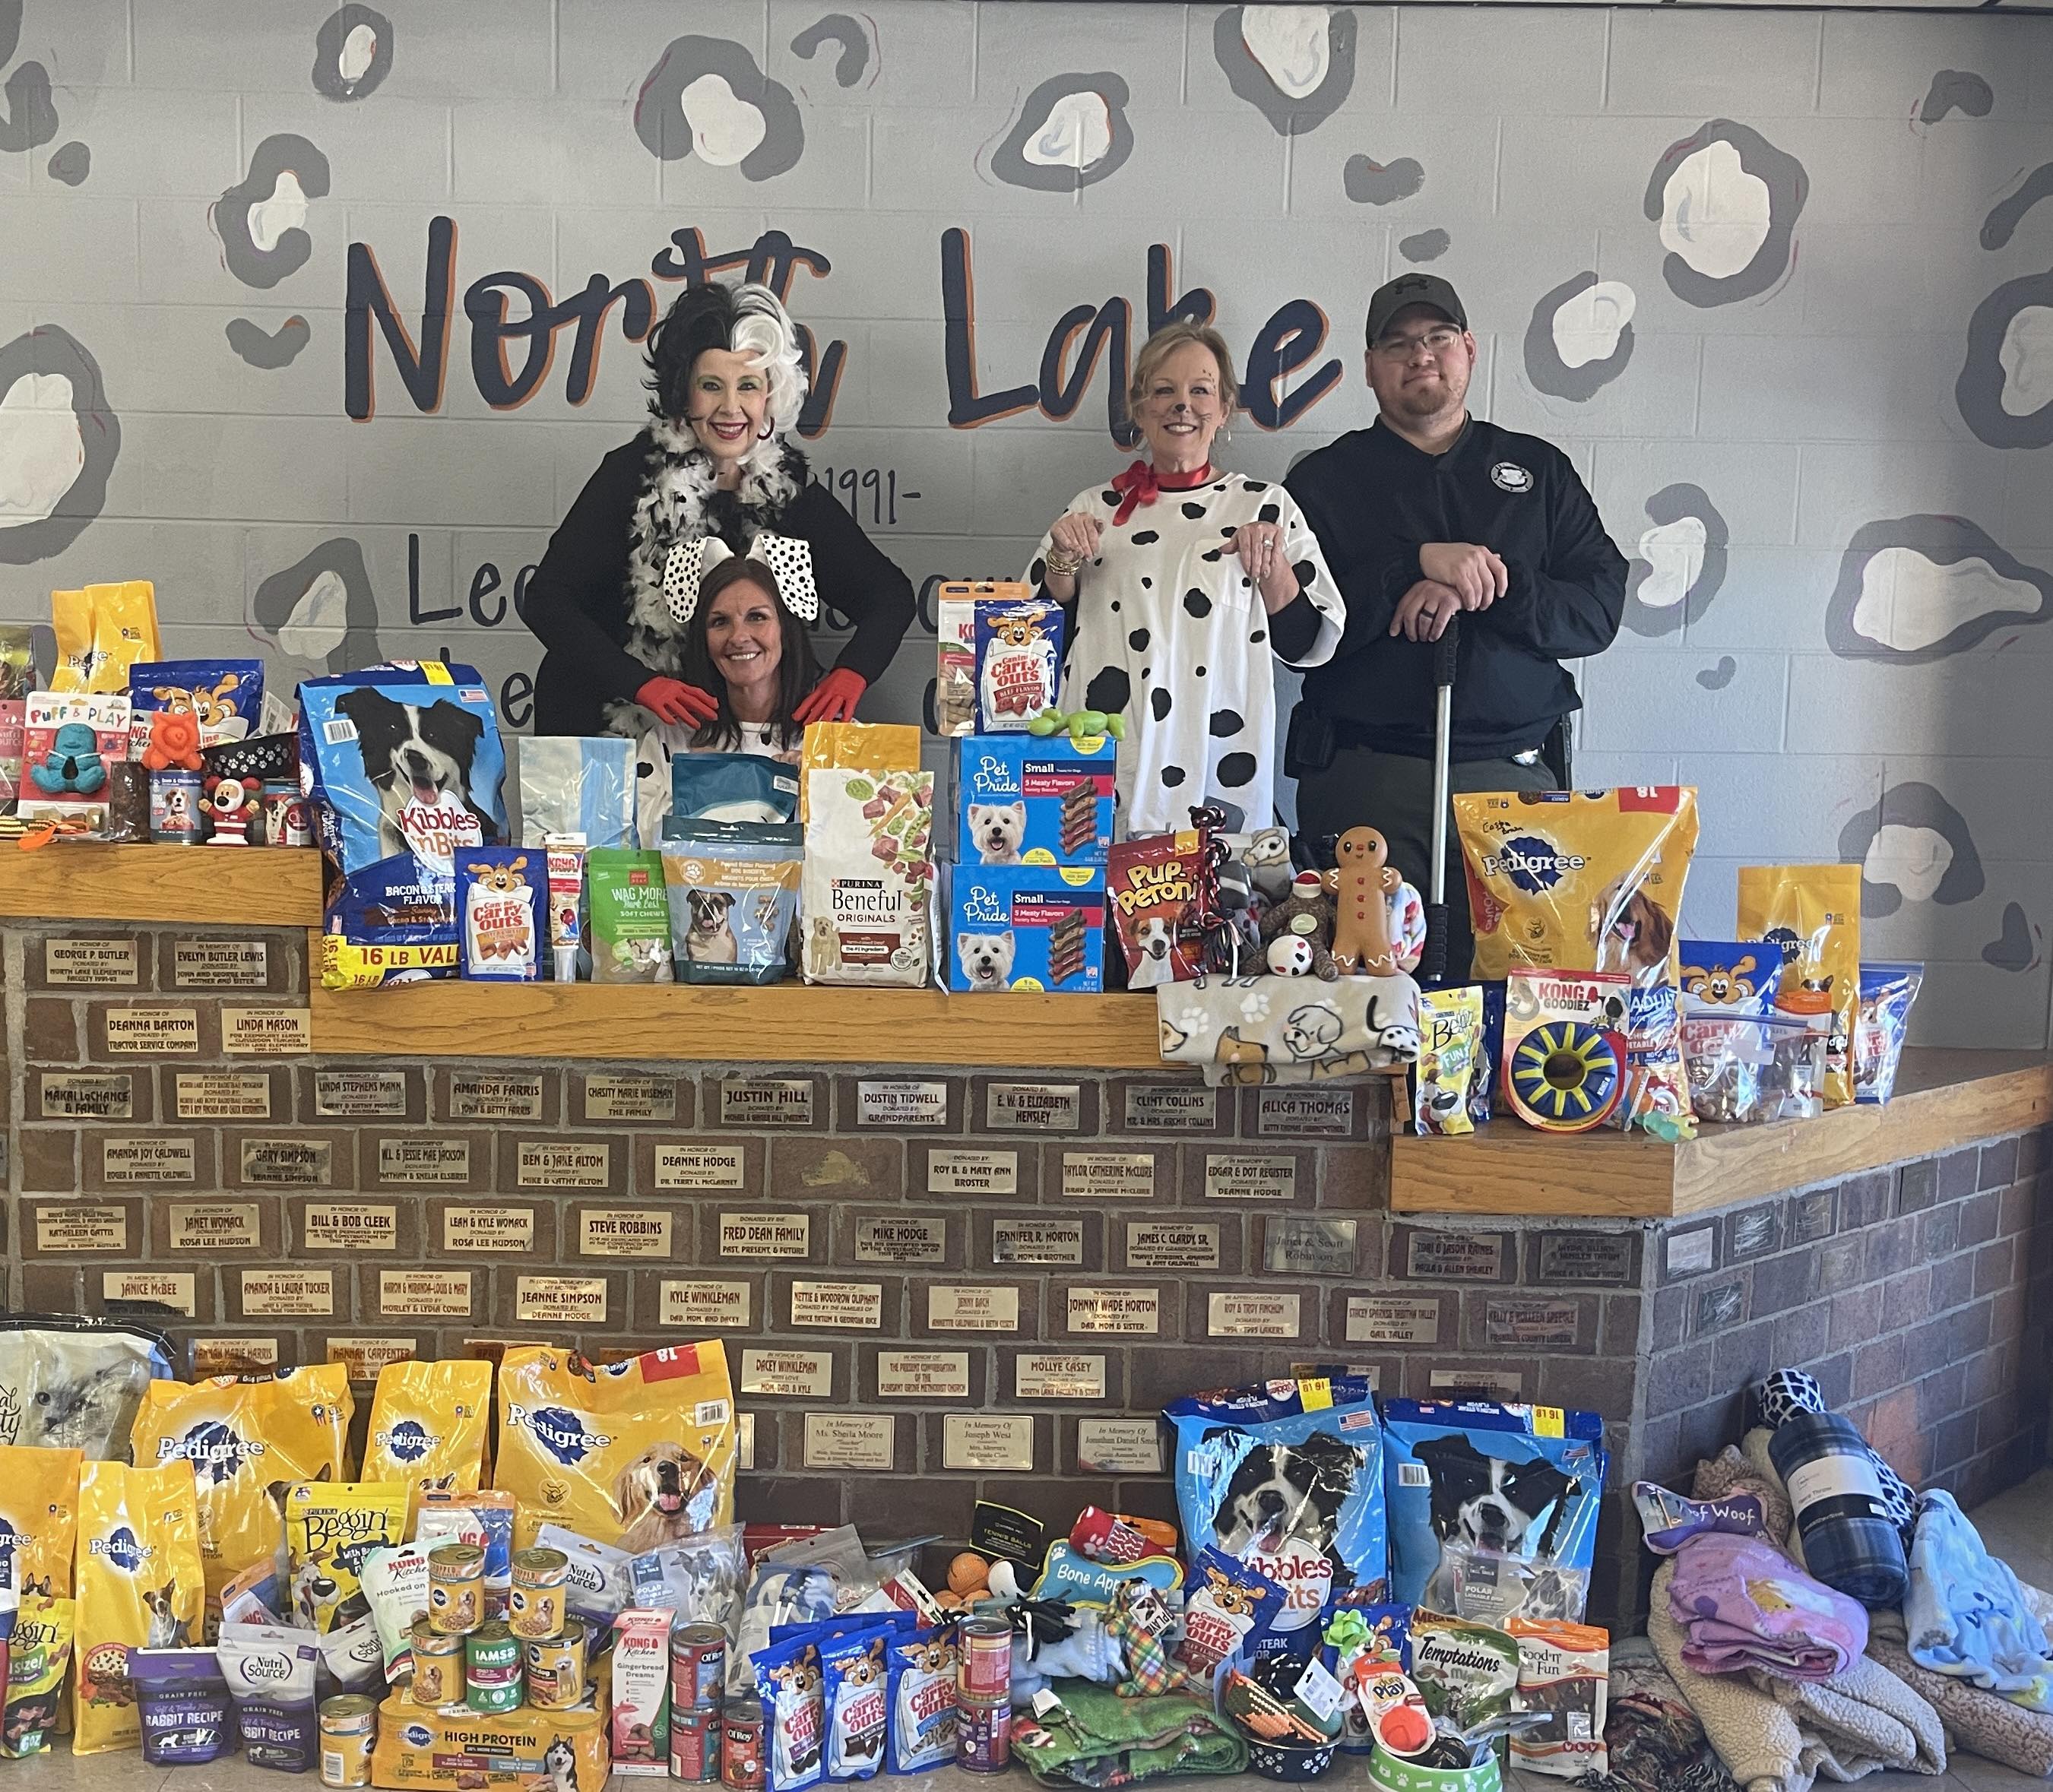 North Lake Elementary recently celebrated 101 days of school with a 101 Dalmation's theme. With a goal of 101 items, students brought in dog food and other items to donate to Franklin County Animal Control and Animal Harbor animal shelter. The donations were wonderful and they exceeded their goal!